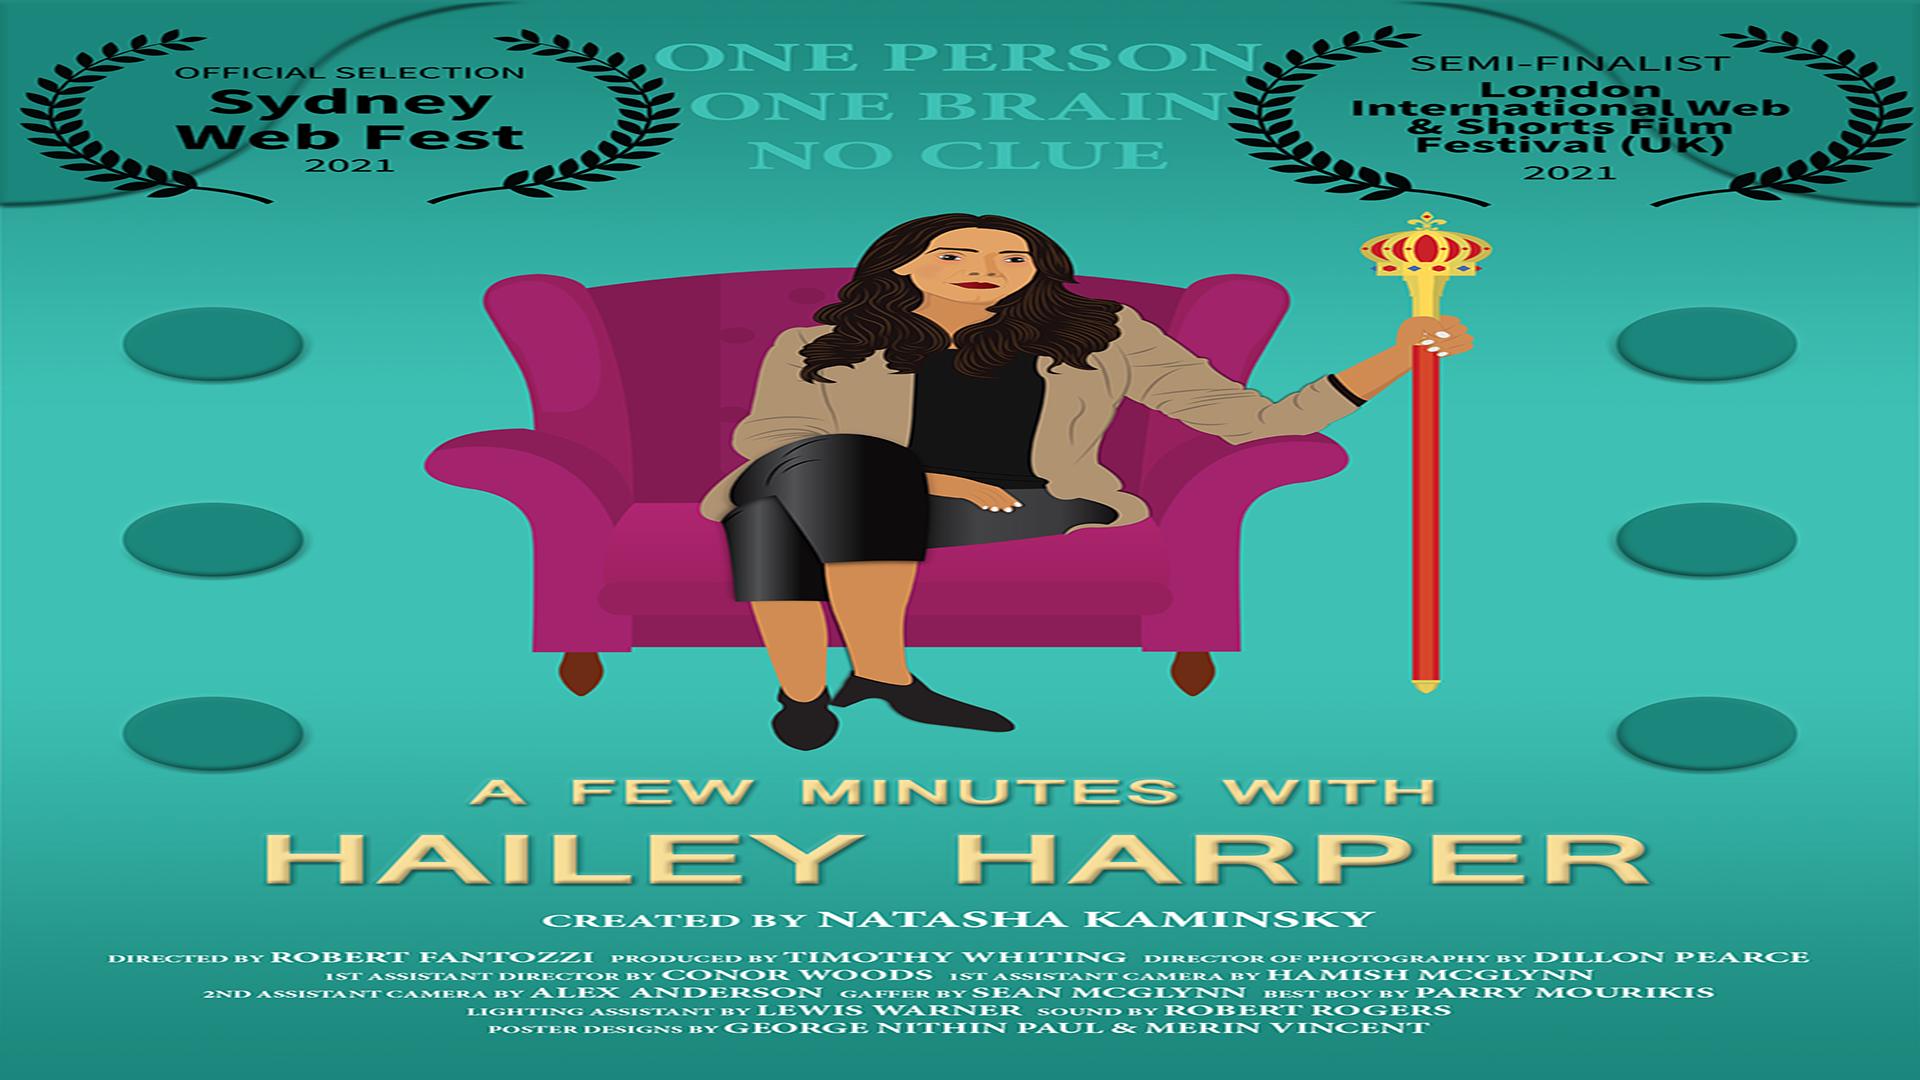 A Few Minutes With Hailey Harper